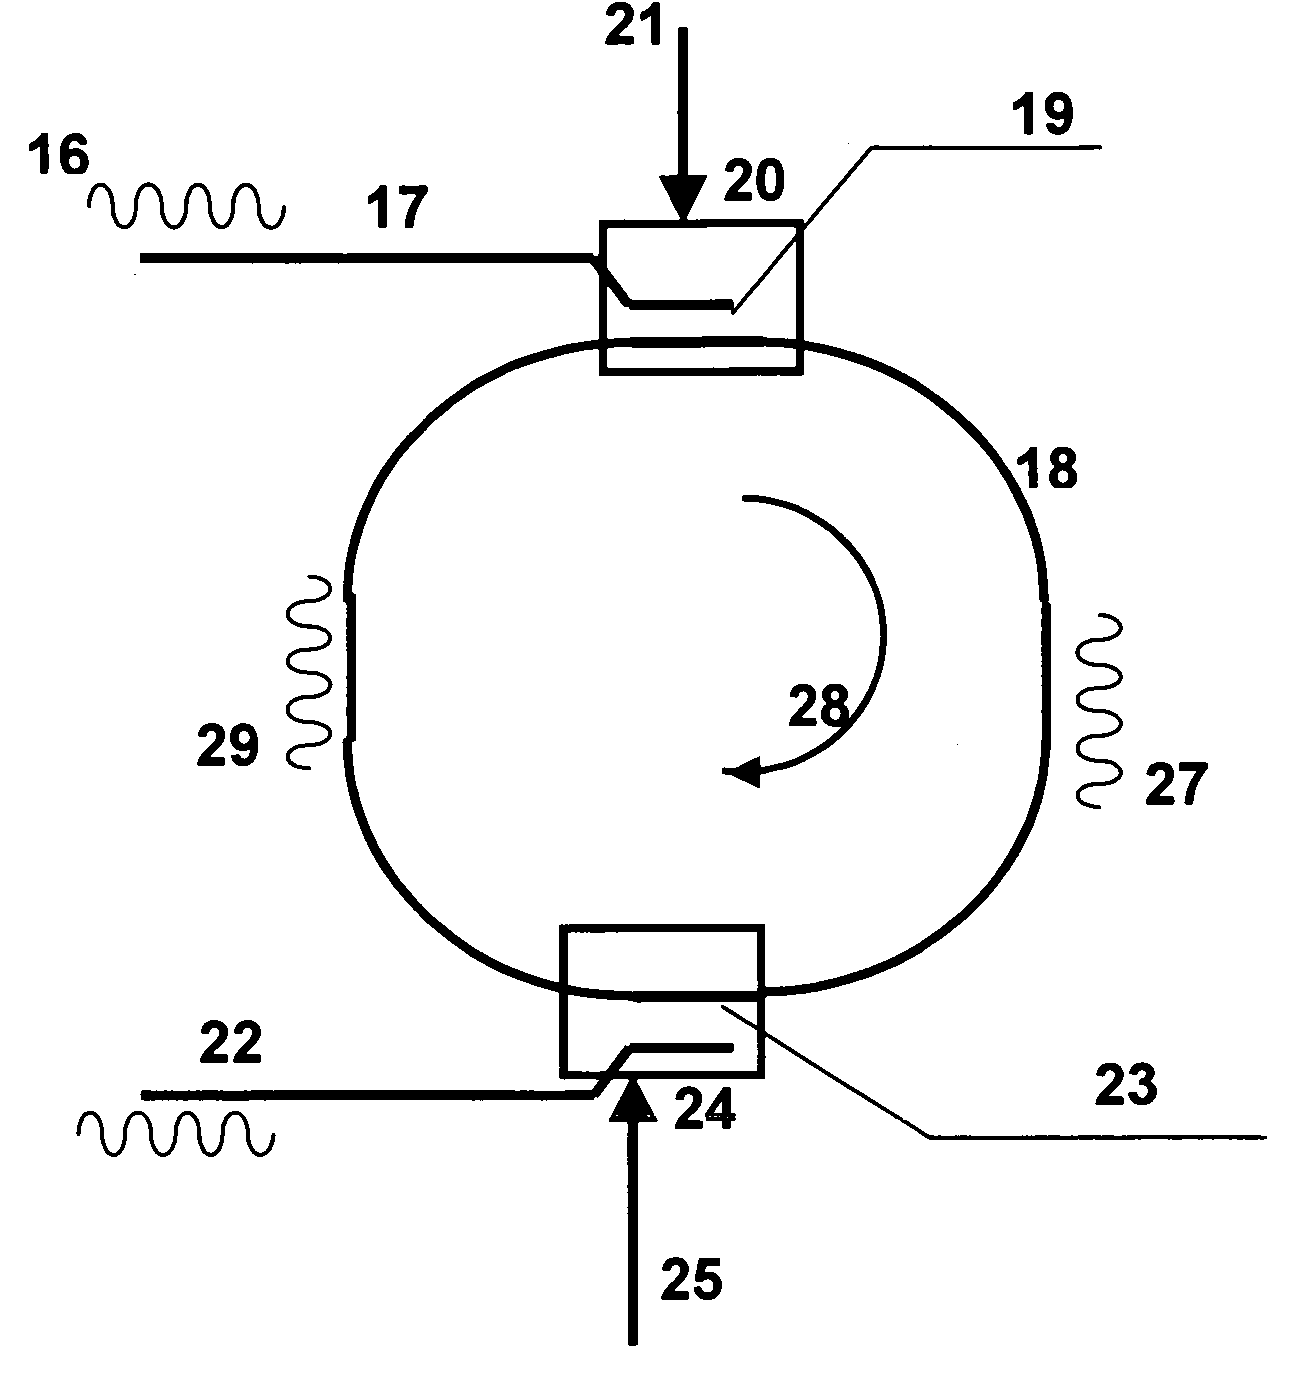 Integrated loop resonator with adjustable couplings and methods of using the same